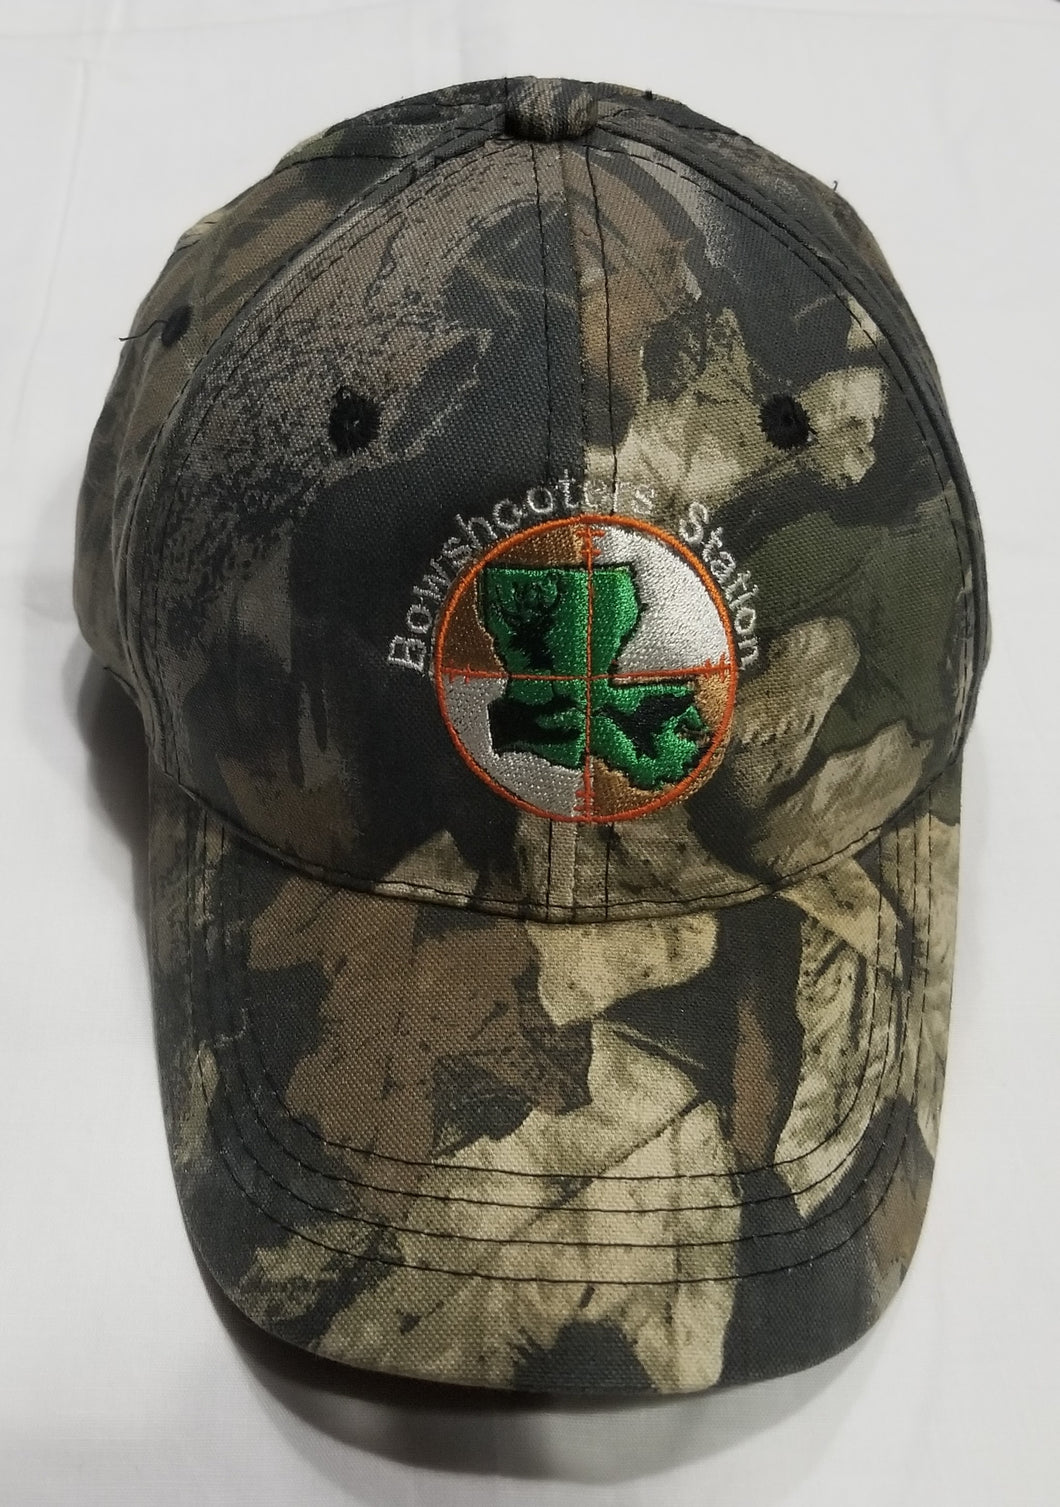 Bowshooters Station Camo Cap